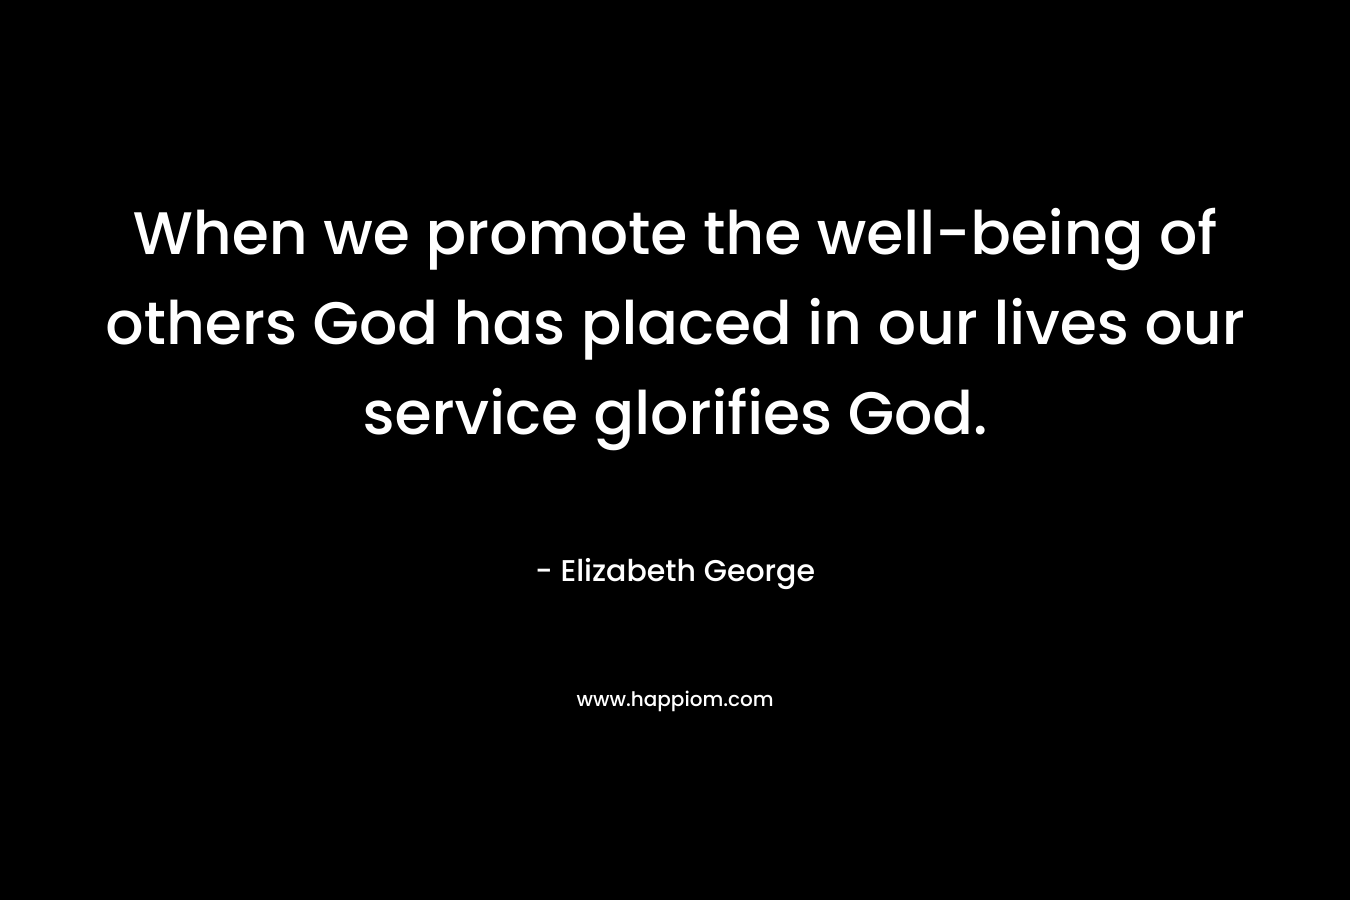 When we promote the well-being of others God has placed in our lives our service glorifies God. – Elizabeth George